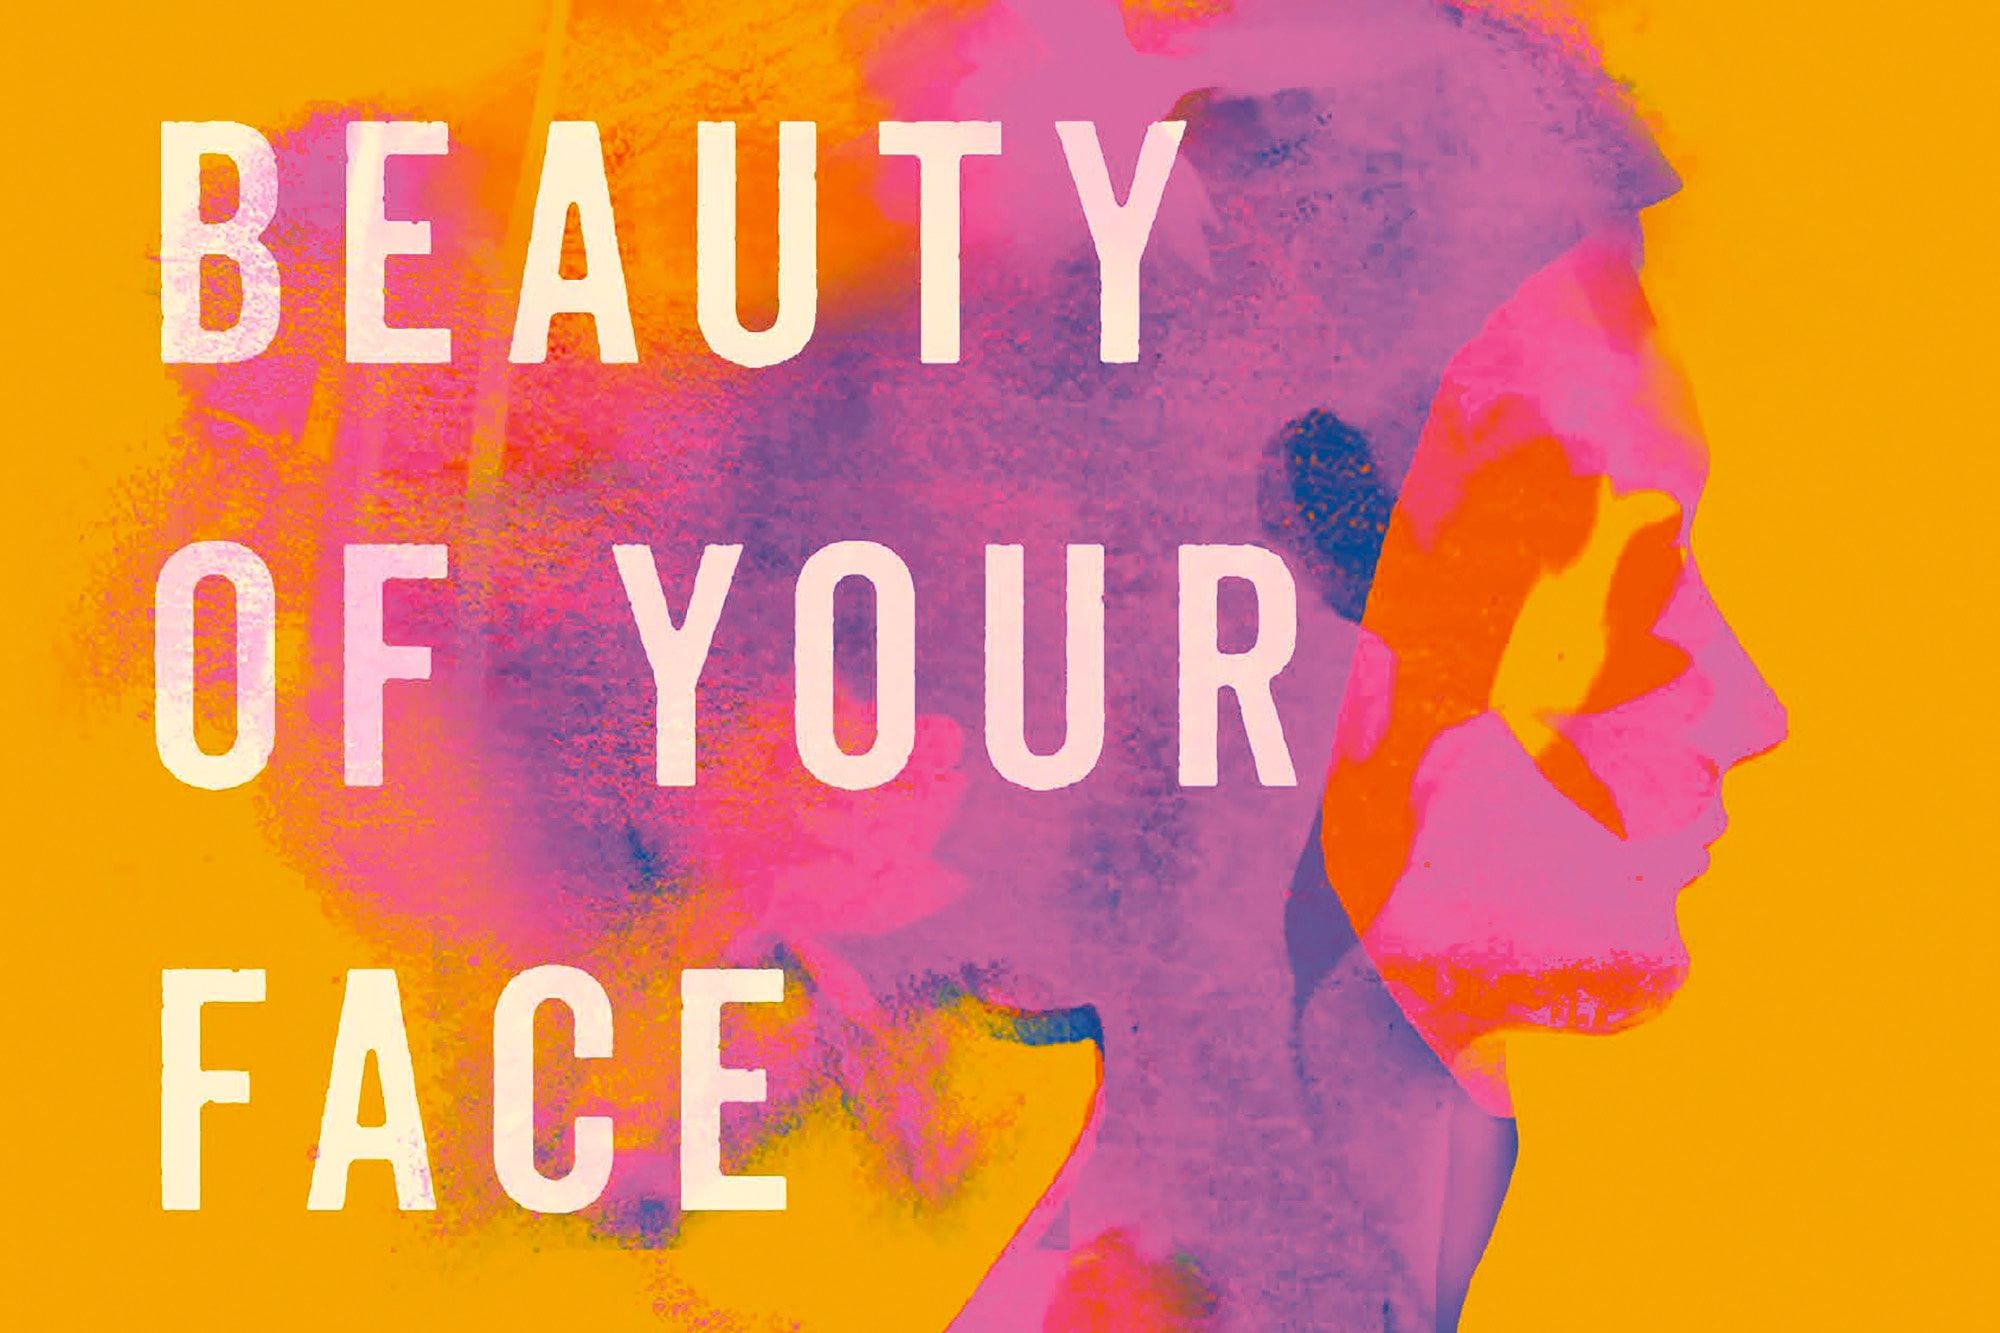 Schisms and Connections in Sahar Mustafah’s ‘The Beauty of Your Face’